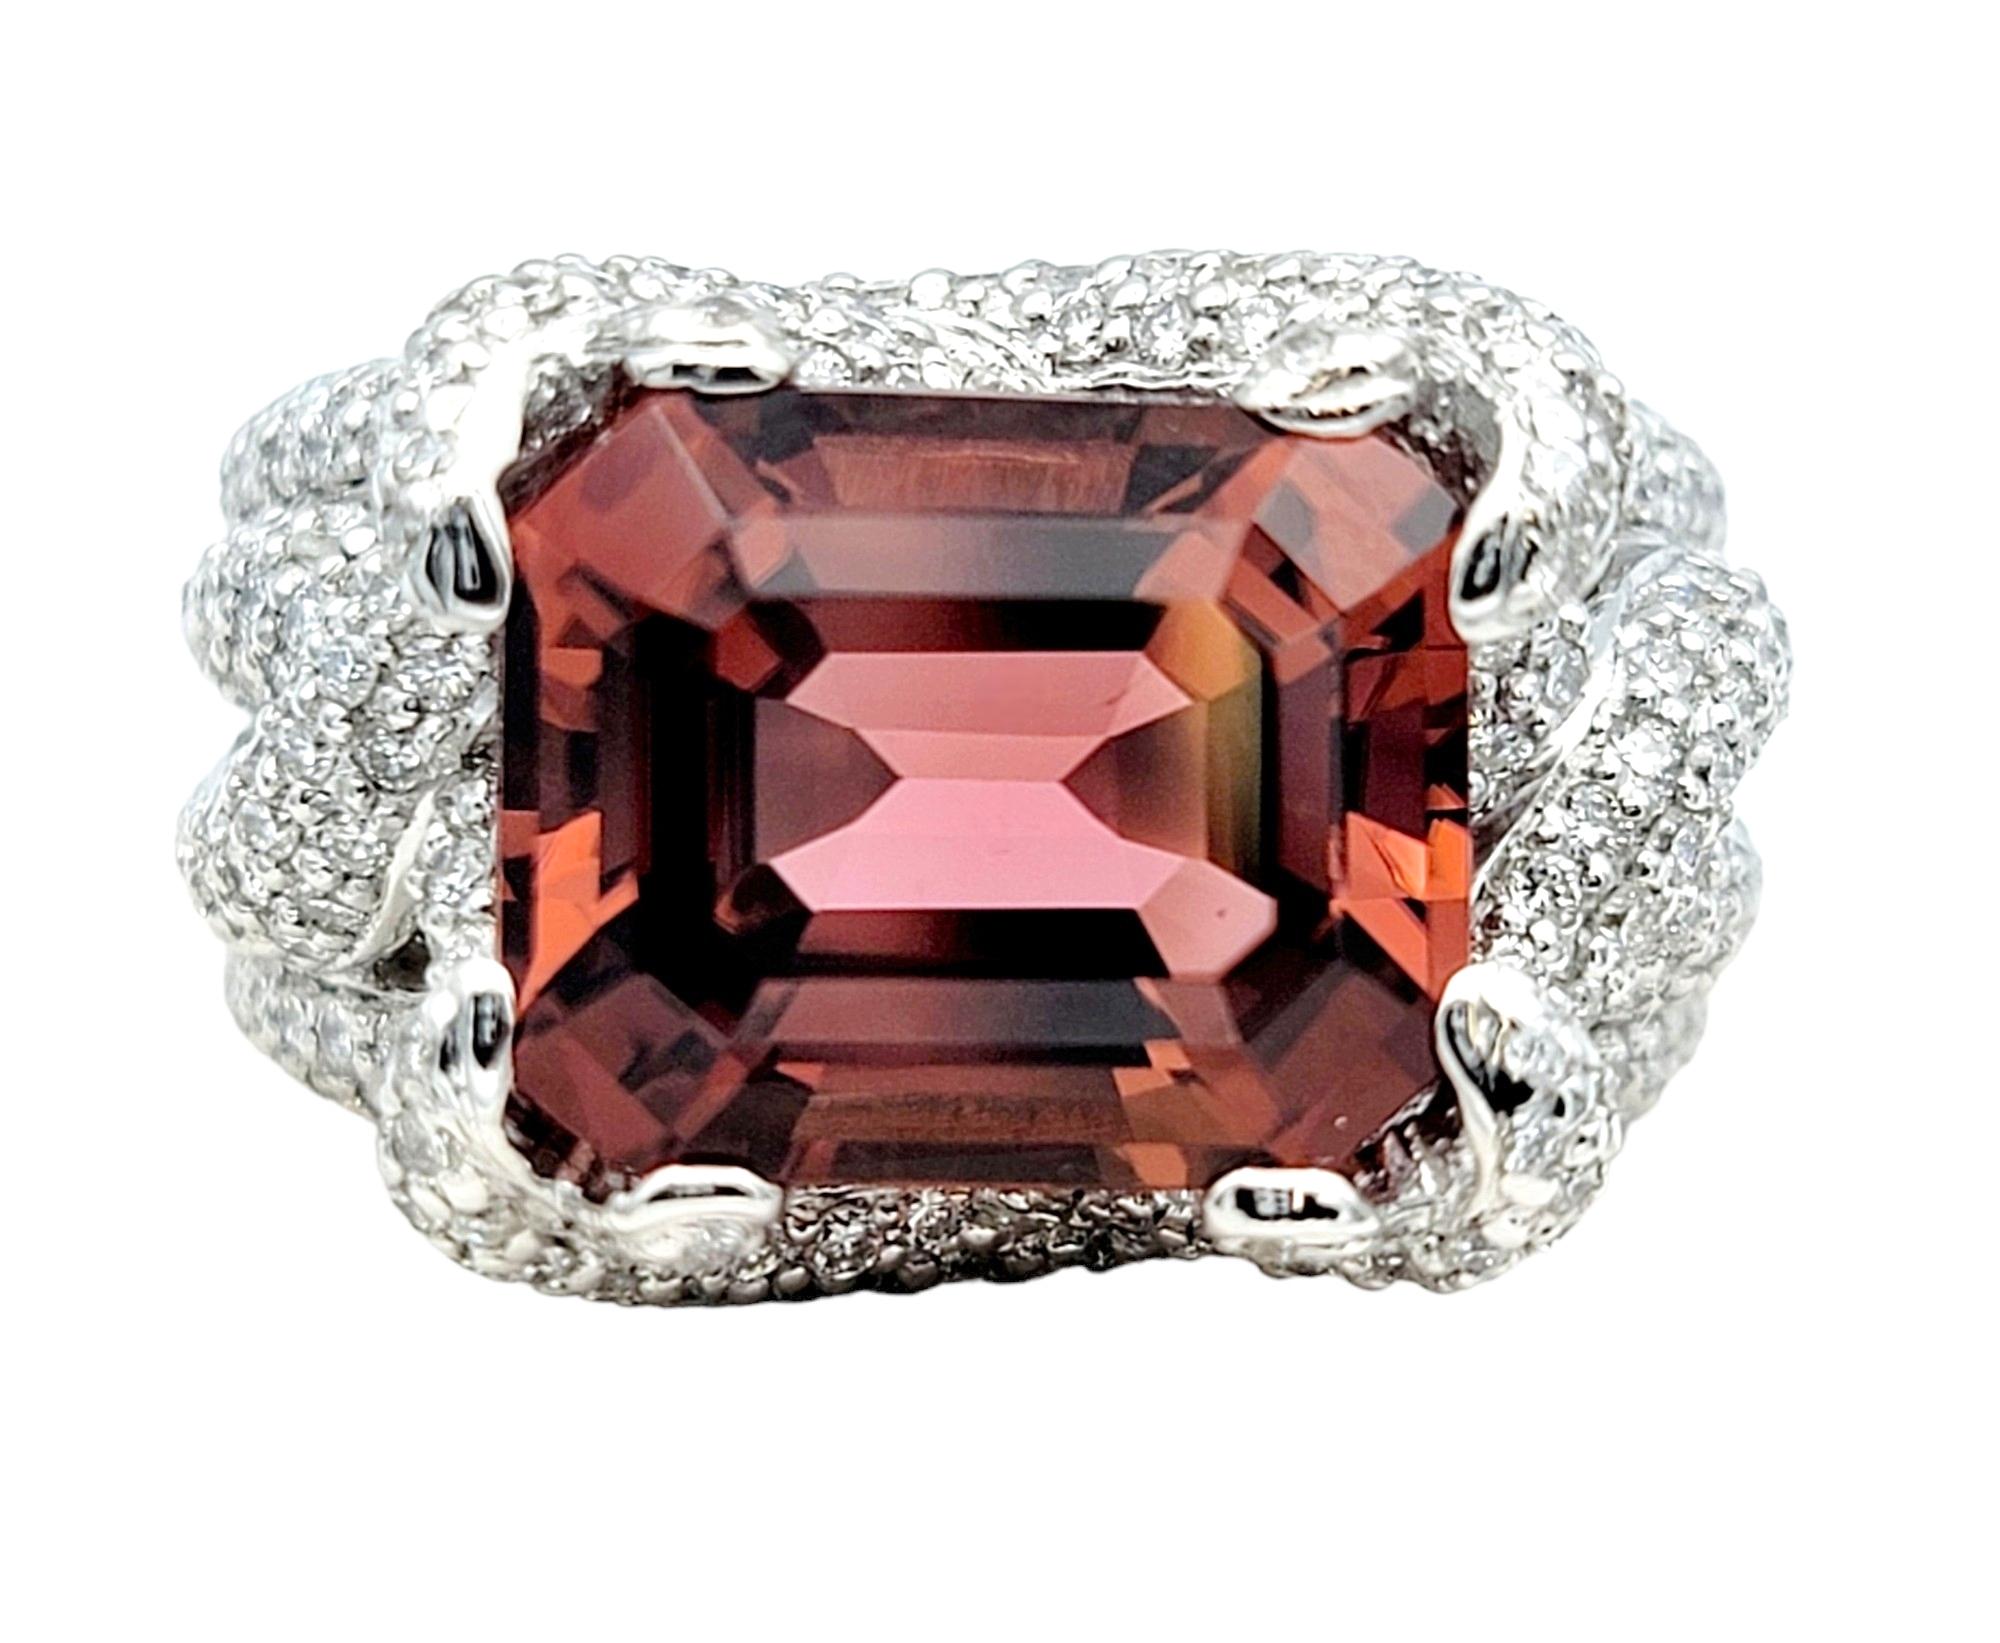 Ring size: 6

So pretty in pink! This stunning and scintillating ring features an overlapping multi-row diamond encrusted band surrounding a sensational 5.75 carat pink tourmaline stone. It is breathtaking, ultra feminine and simply gorgeous. 

This